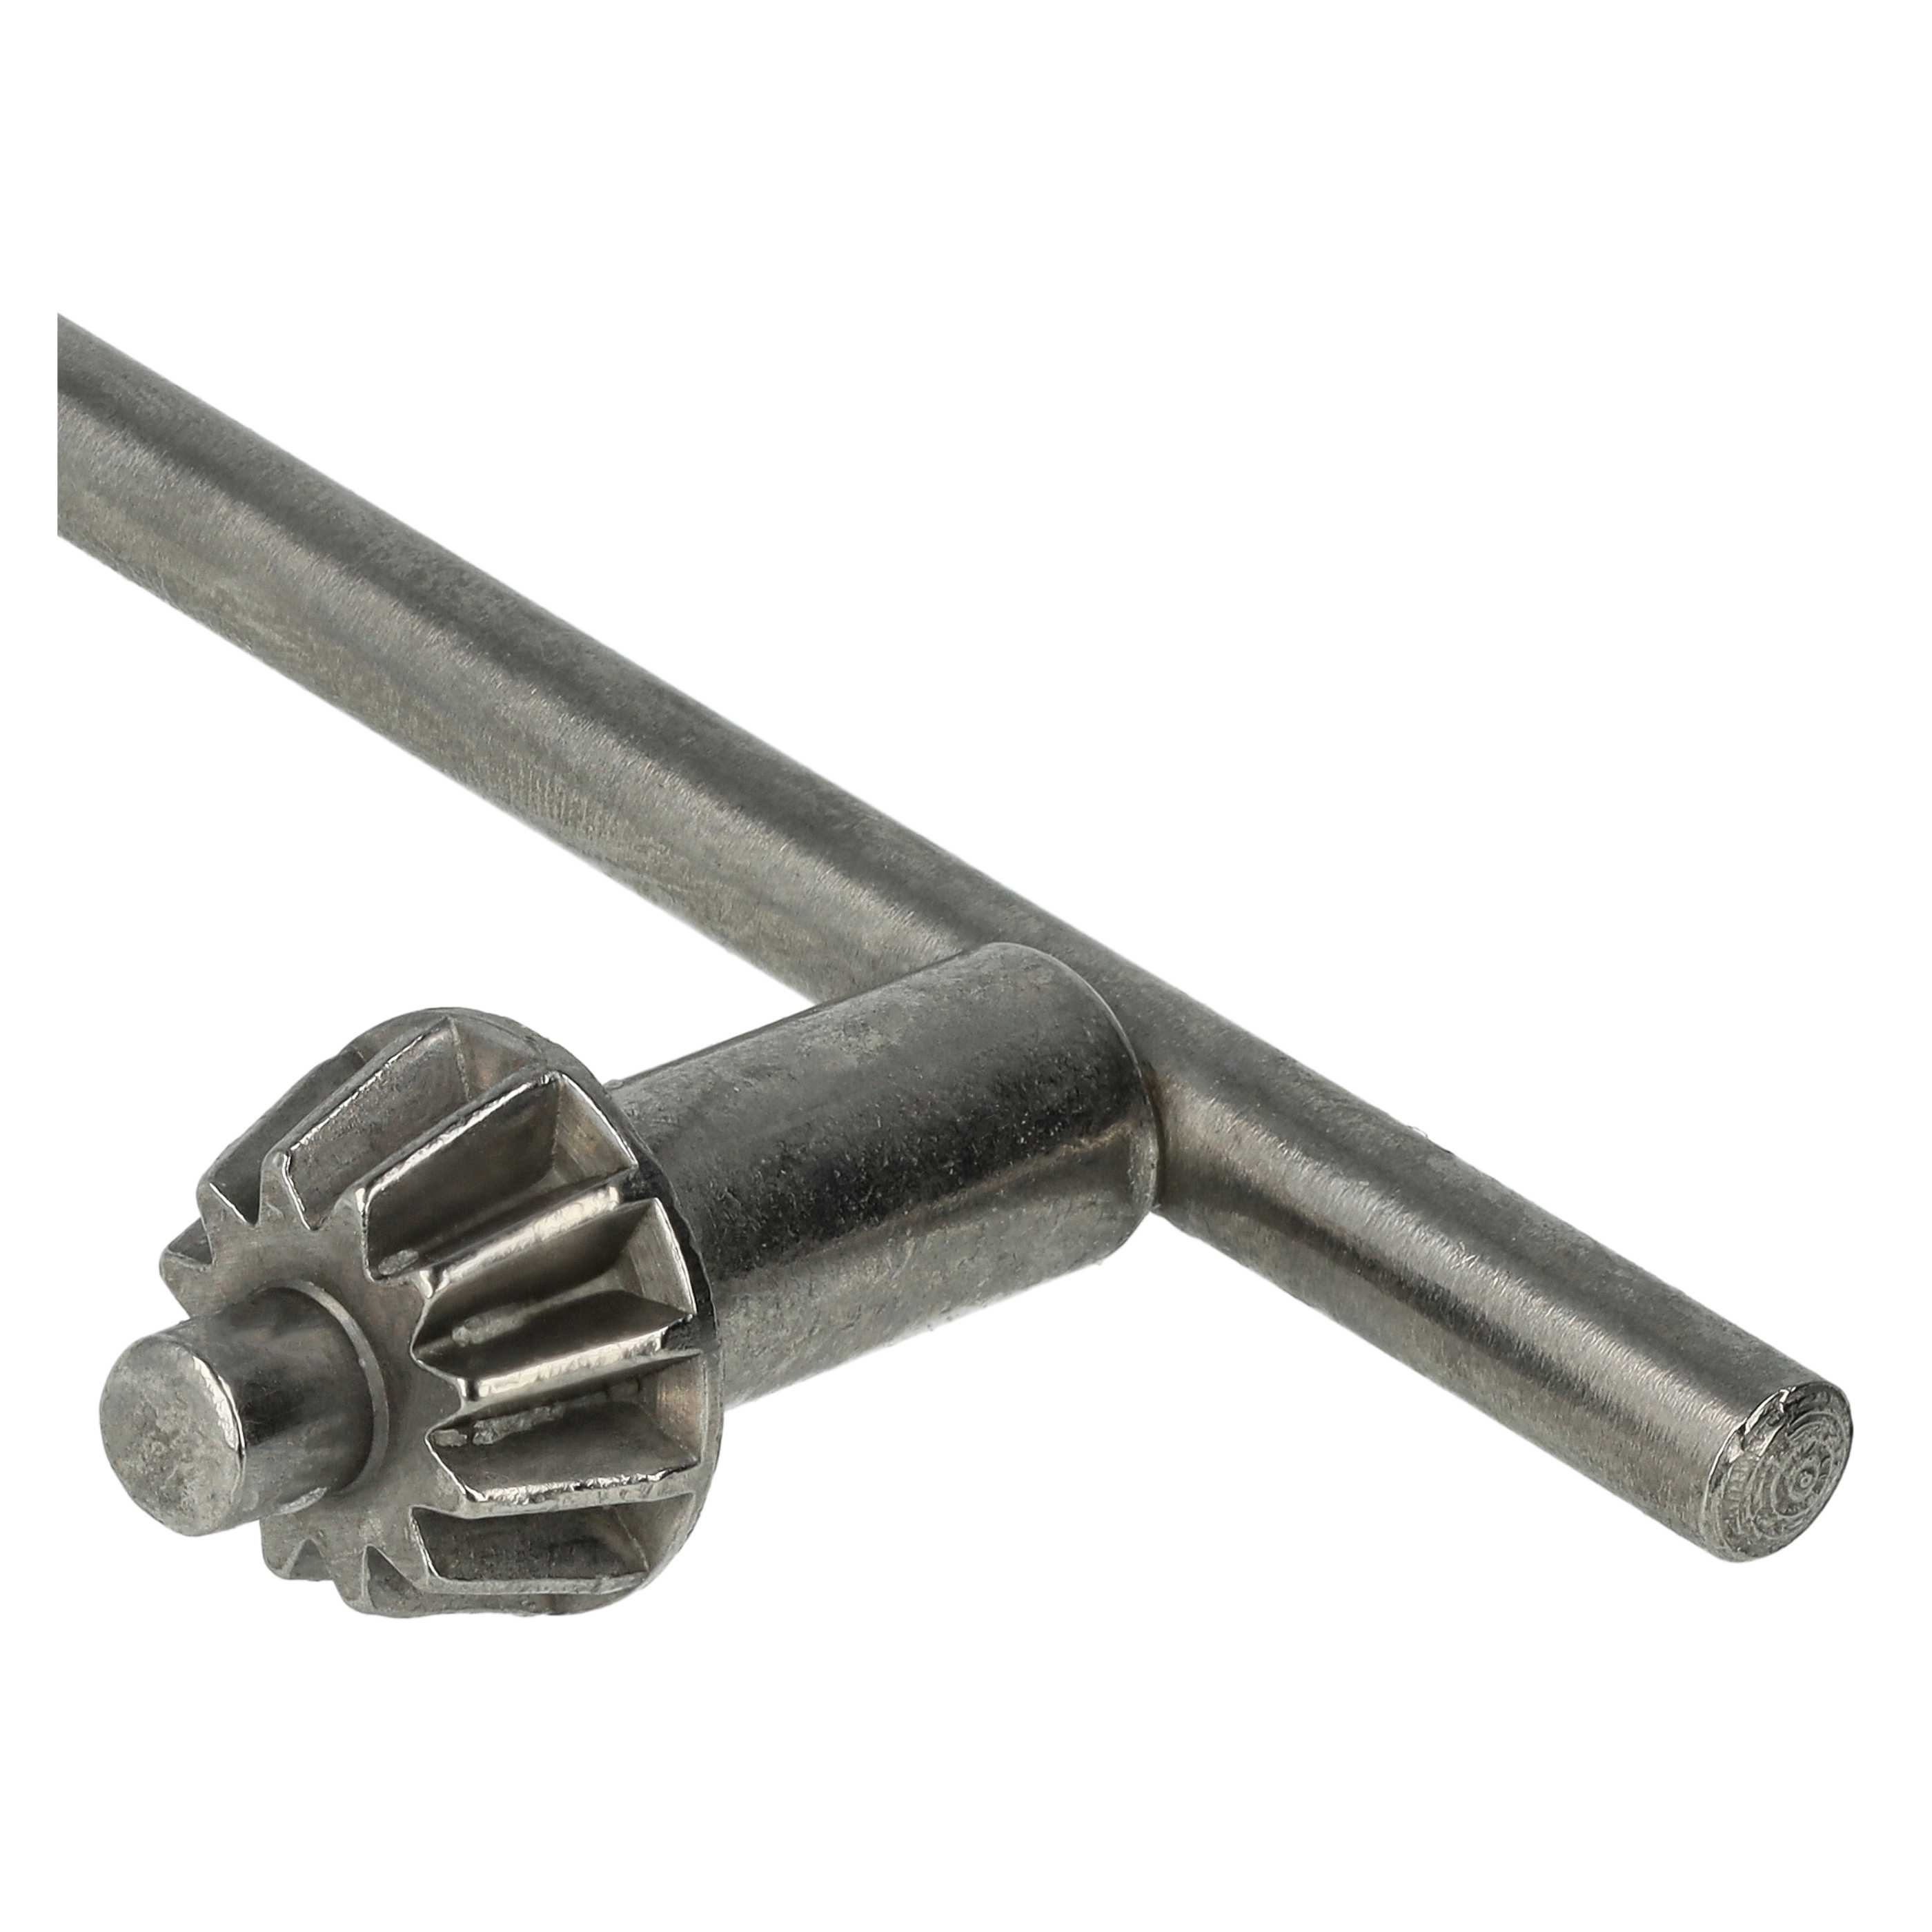 10x Drill Chuck Key S2A 10-13mm replaces Wolfcraft 2630000 for Drills from e.g. Metabo, AEG